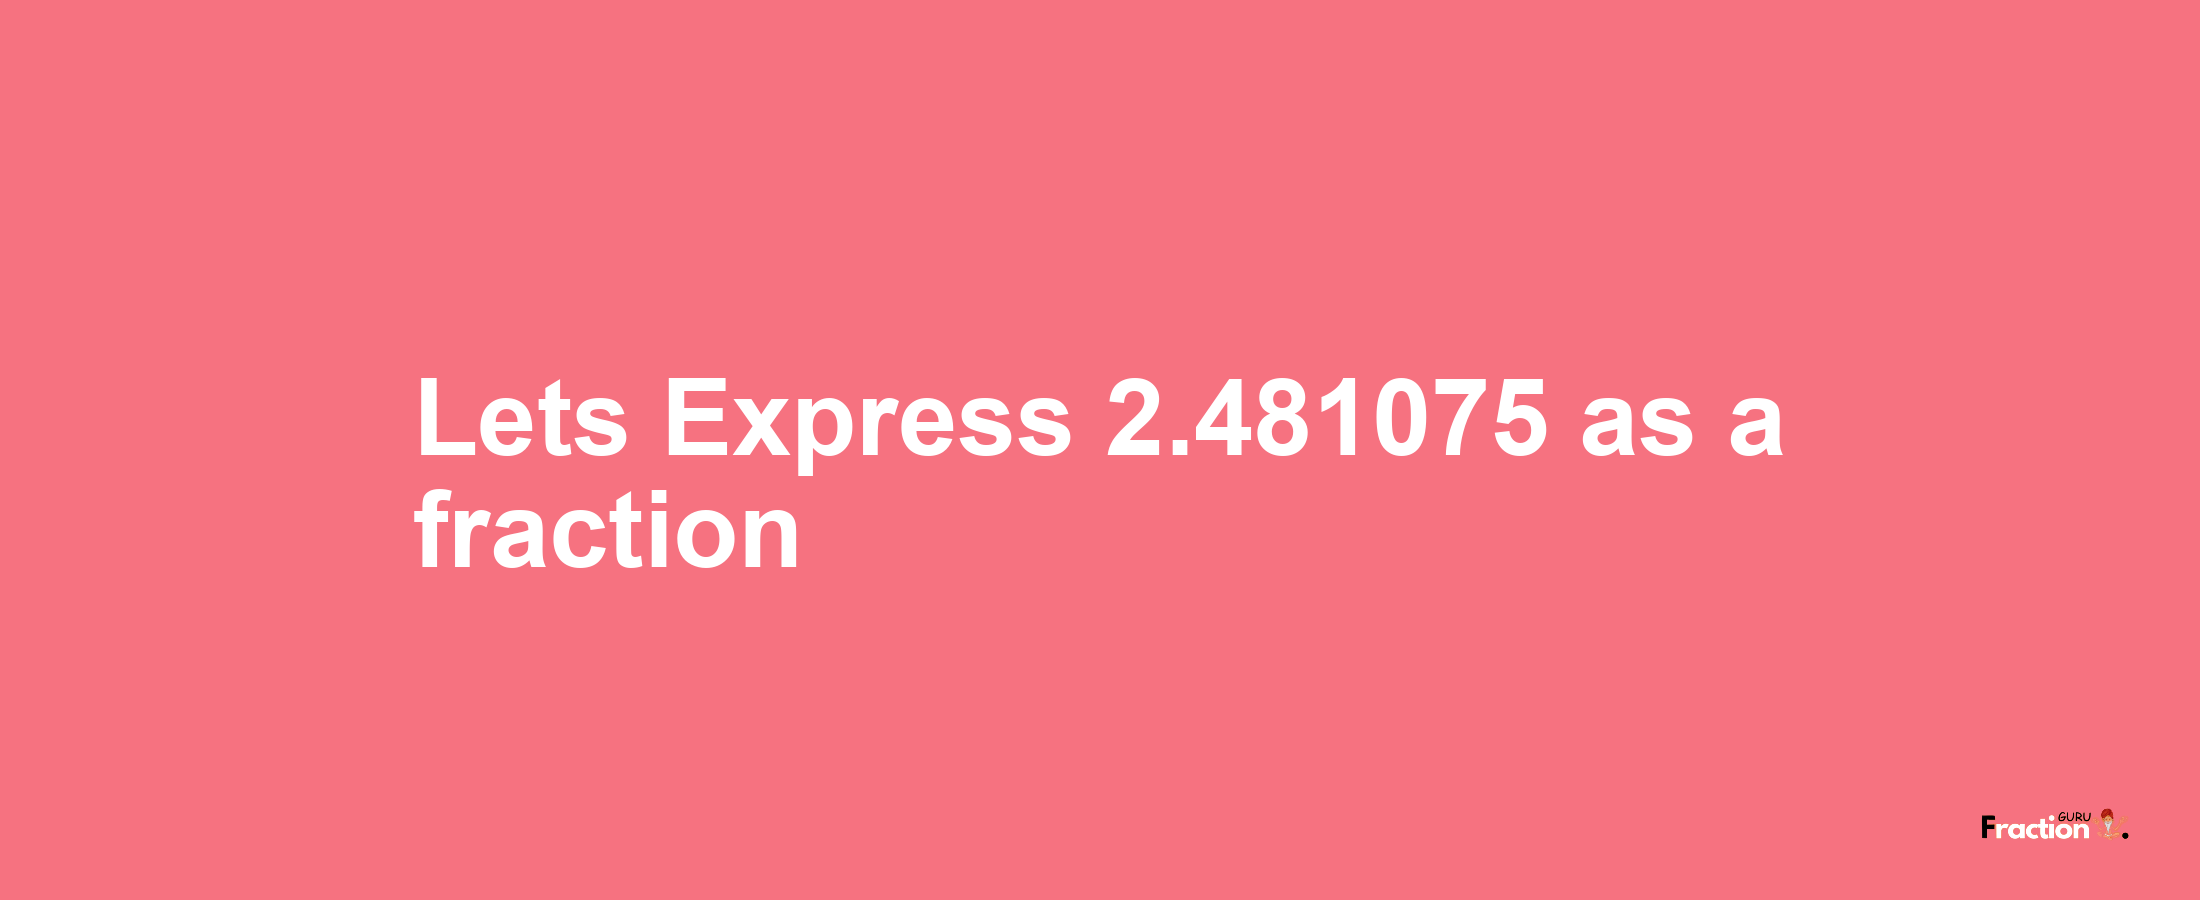 Lets Express 2.481075 as afraction